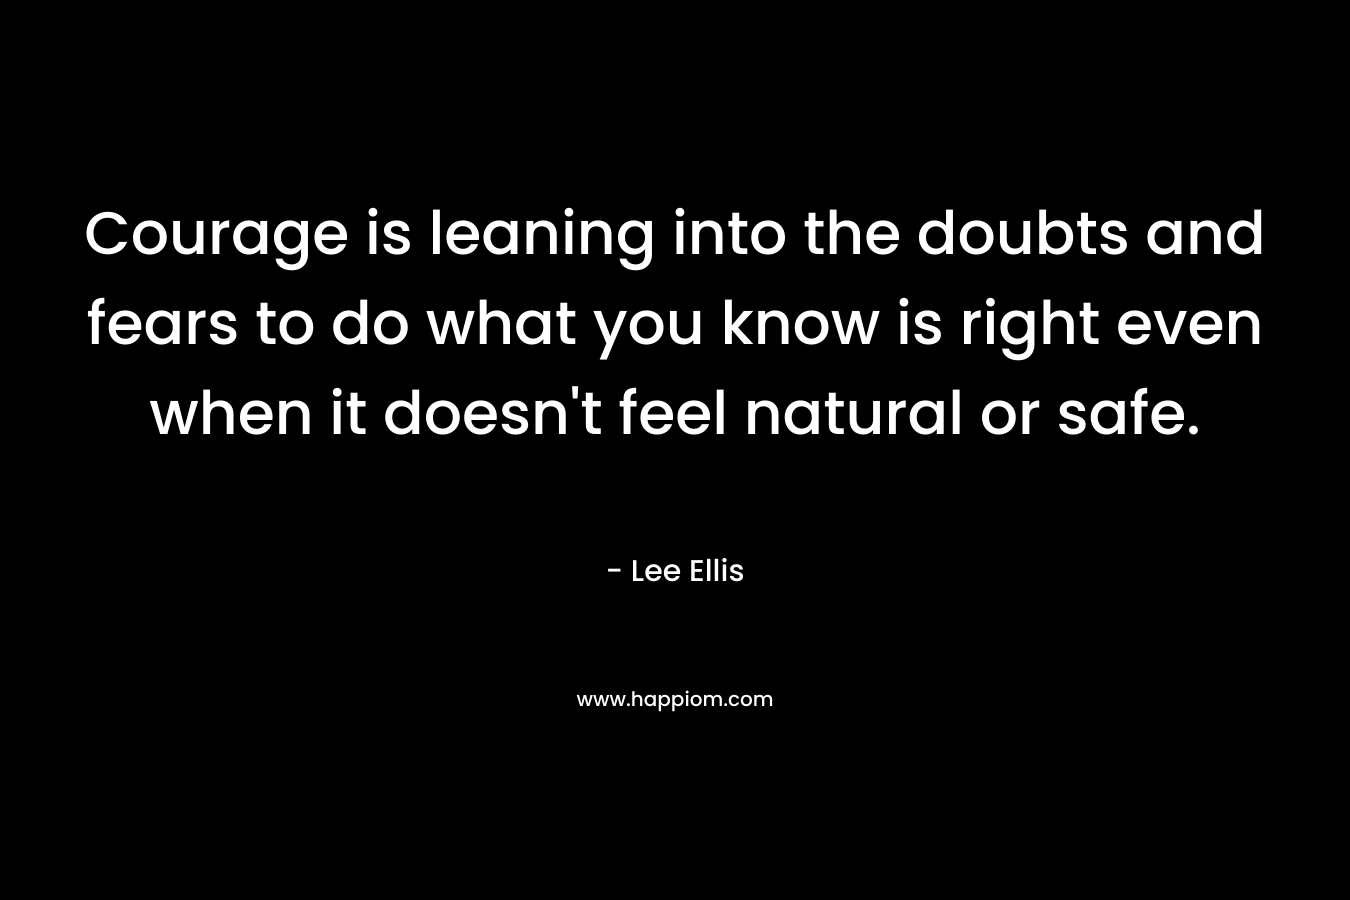 Courage is leaning into the doubts and fears to do what you know is right even when it doesn't feel natural or safe.